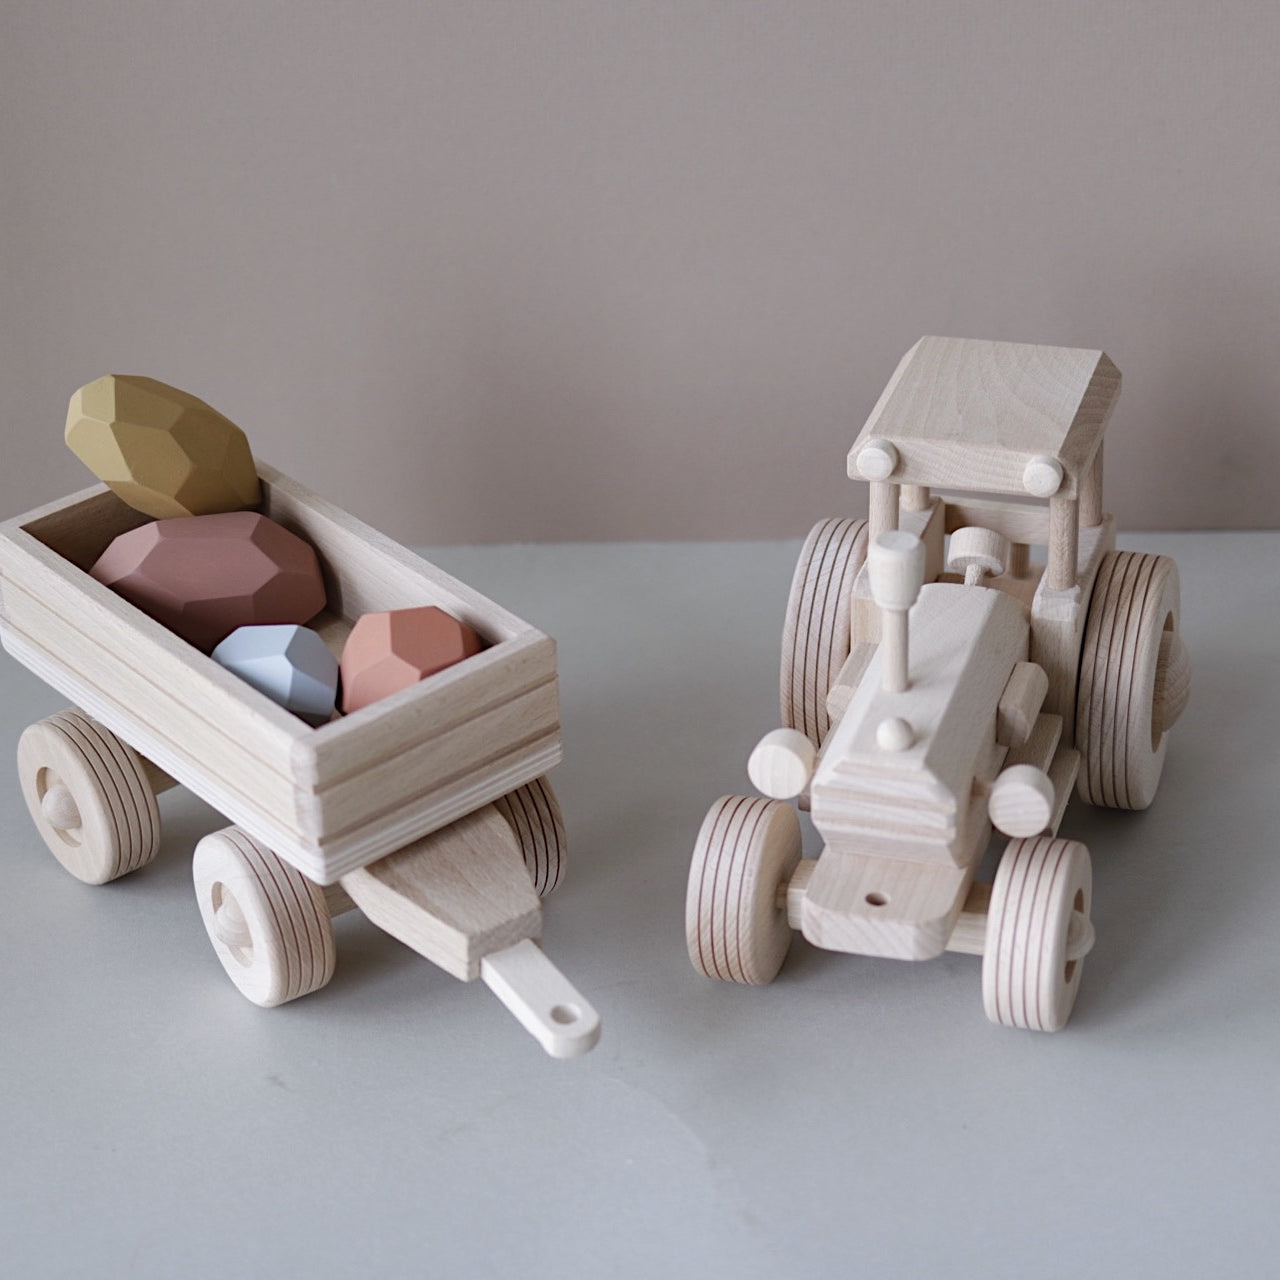 Large wooden tractor PRE ORDER - Happy Little Folks